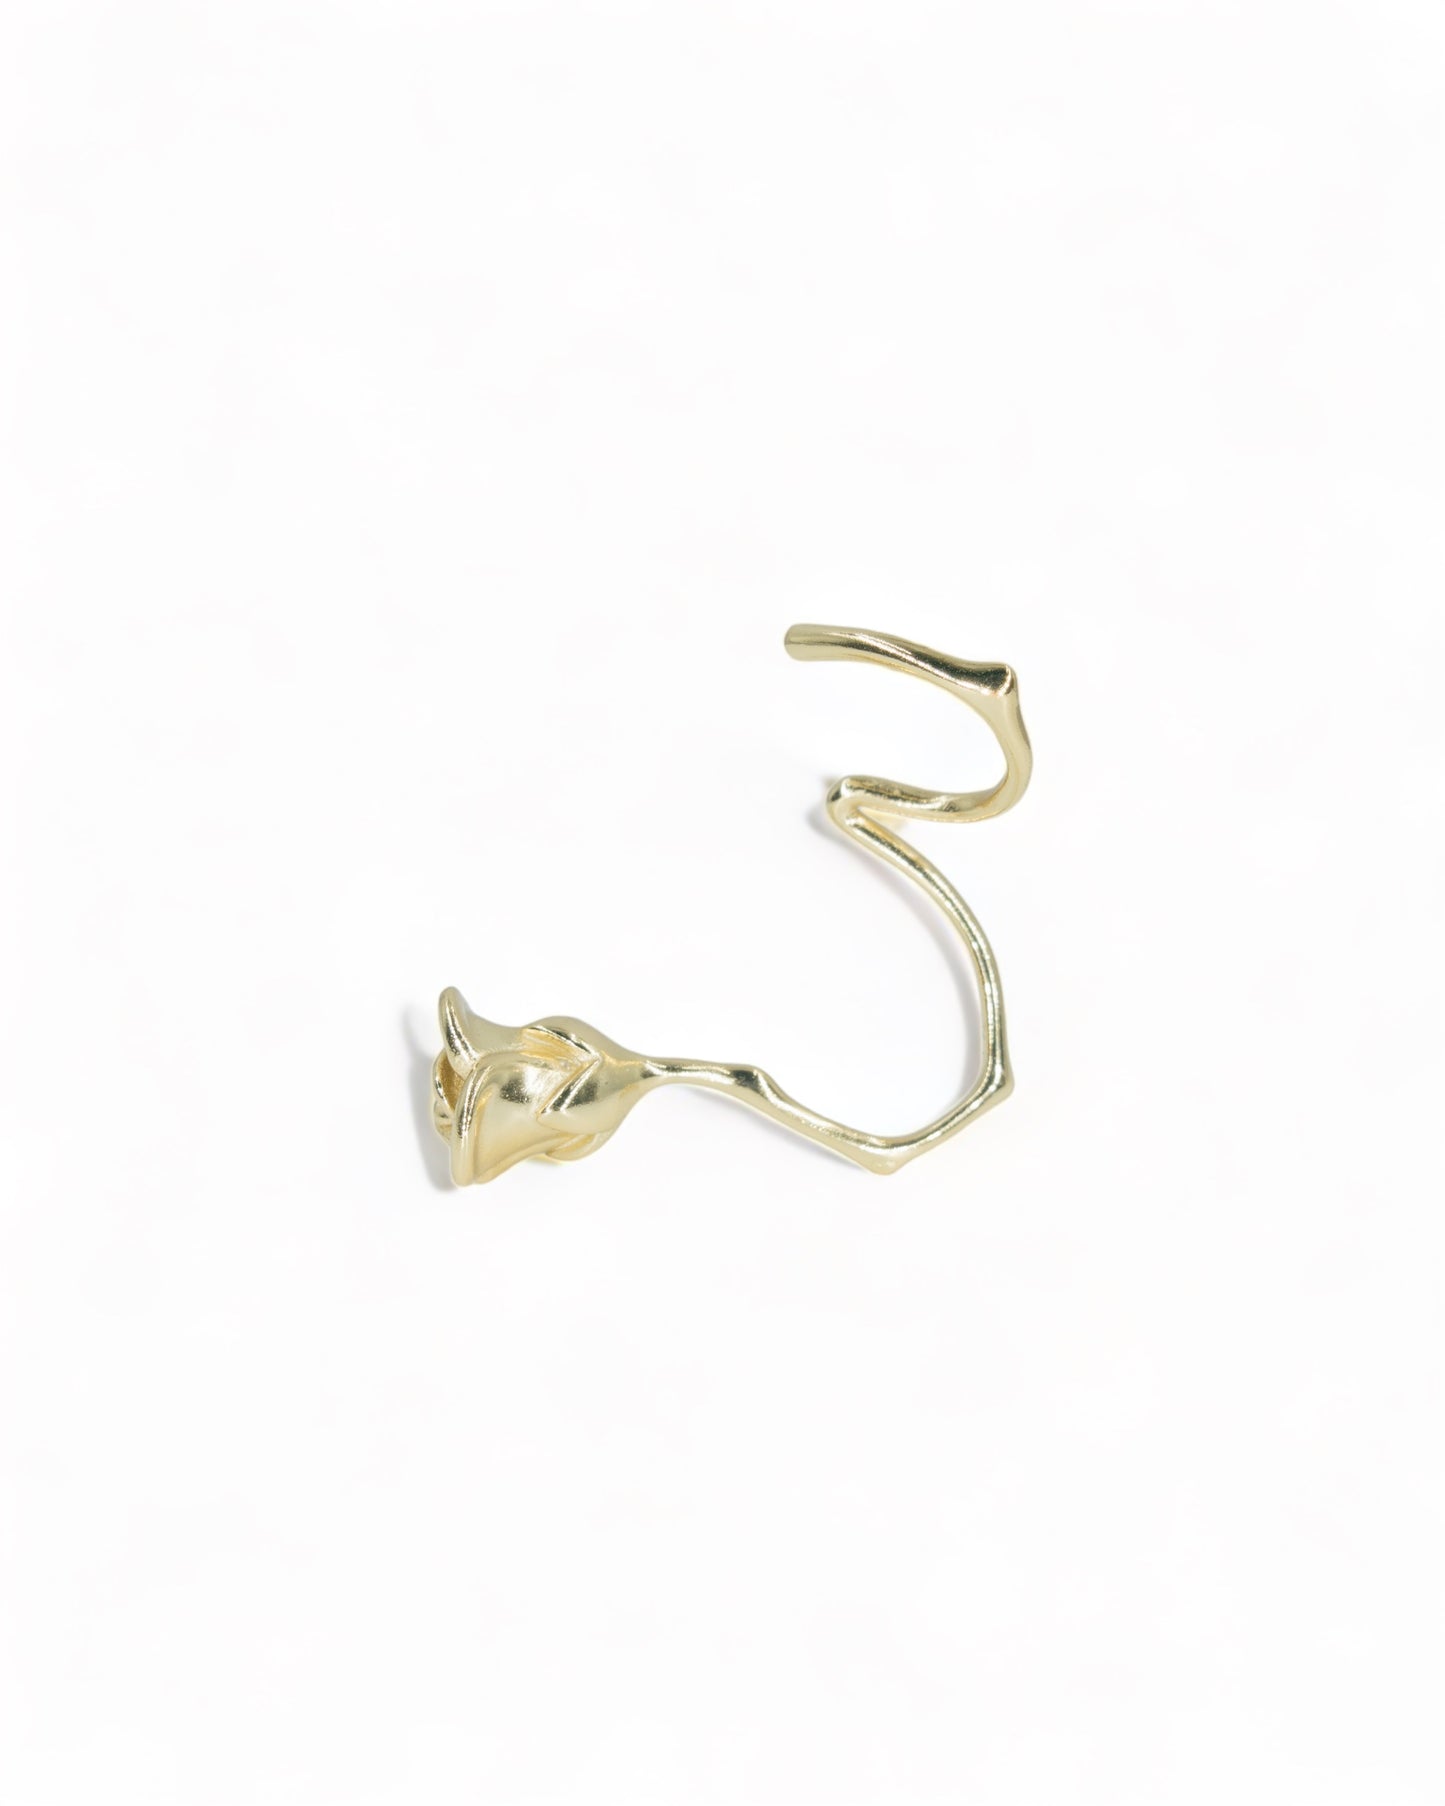 Everlasting Rose Single Earring with Cuff